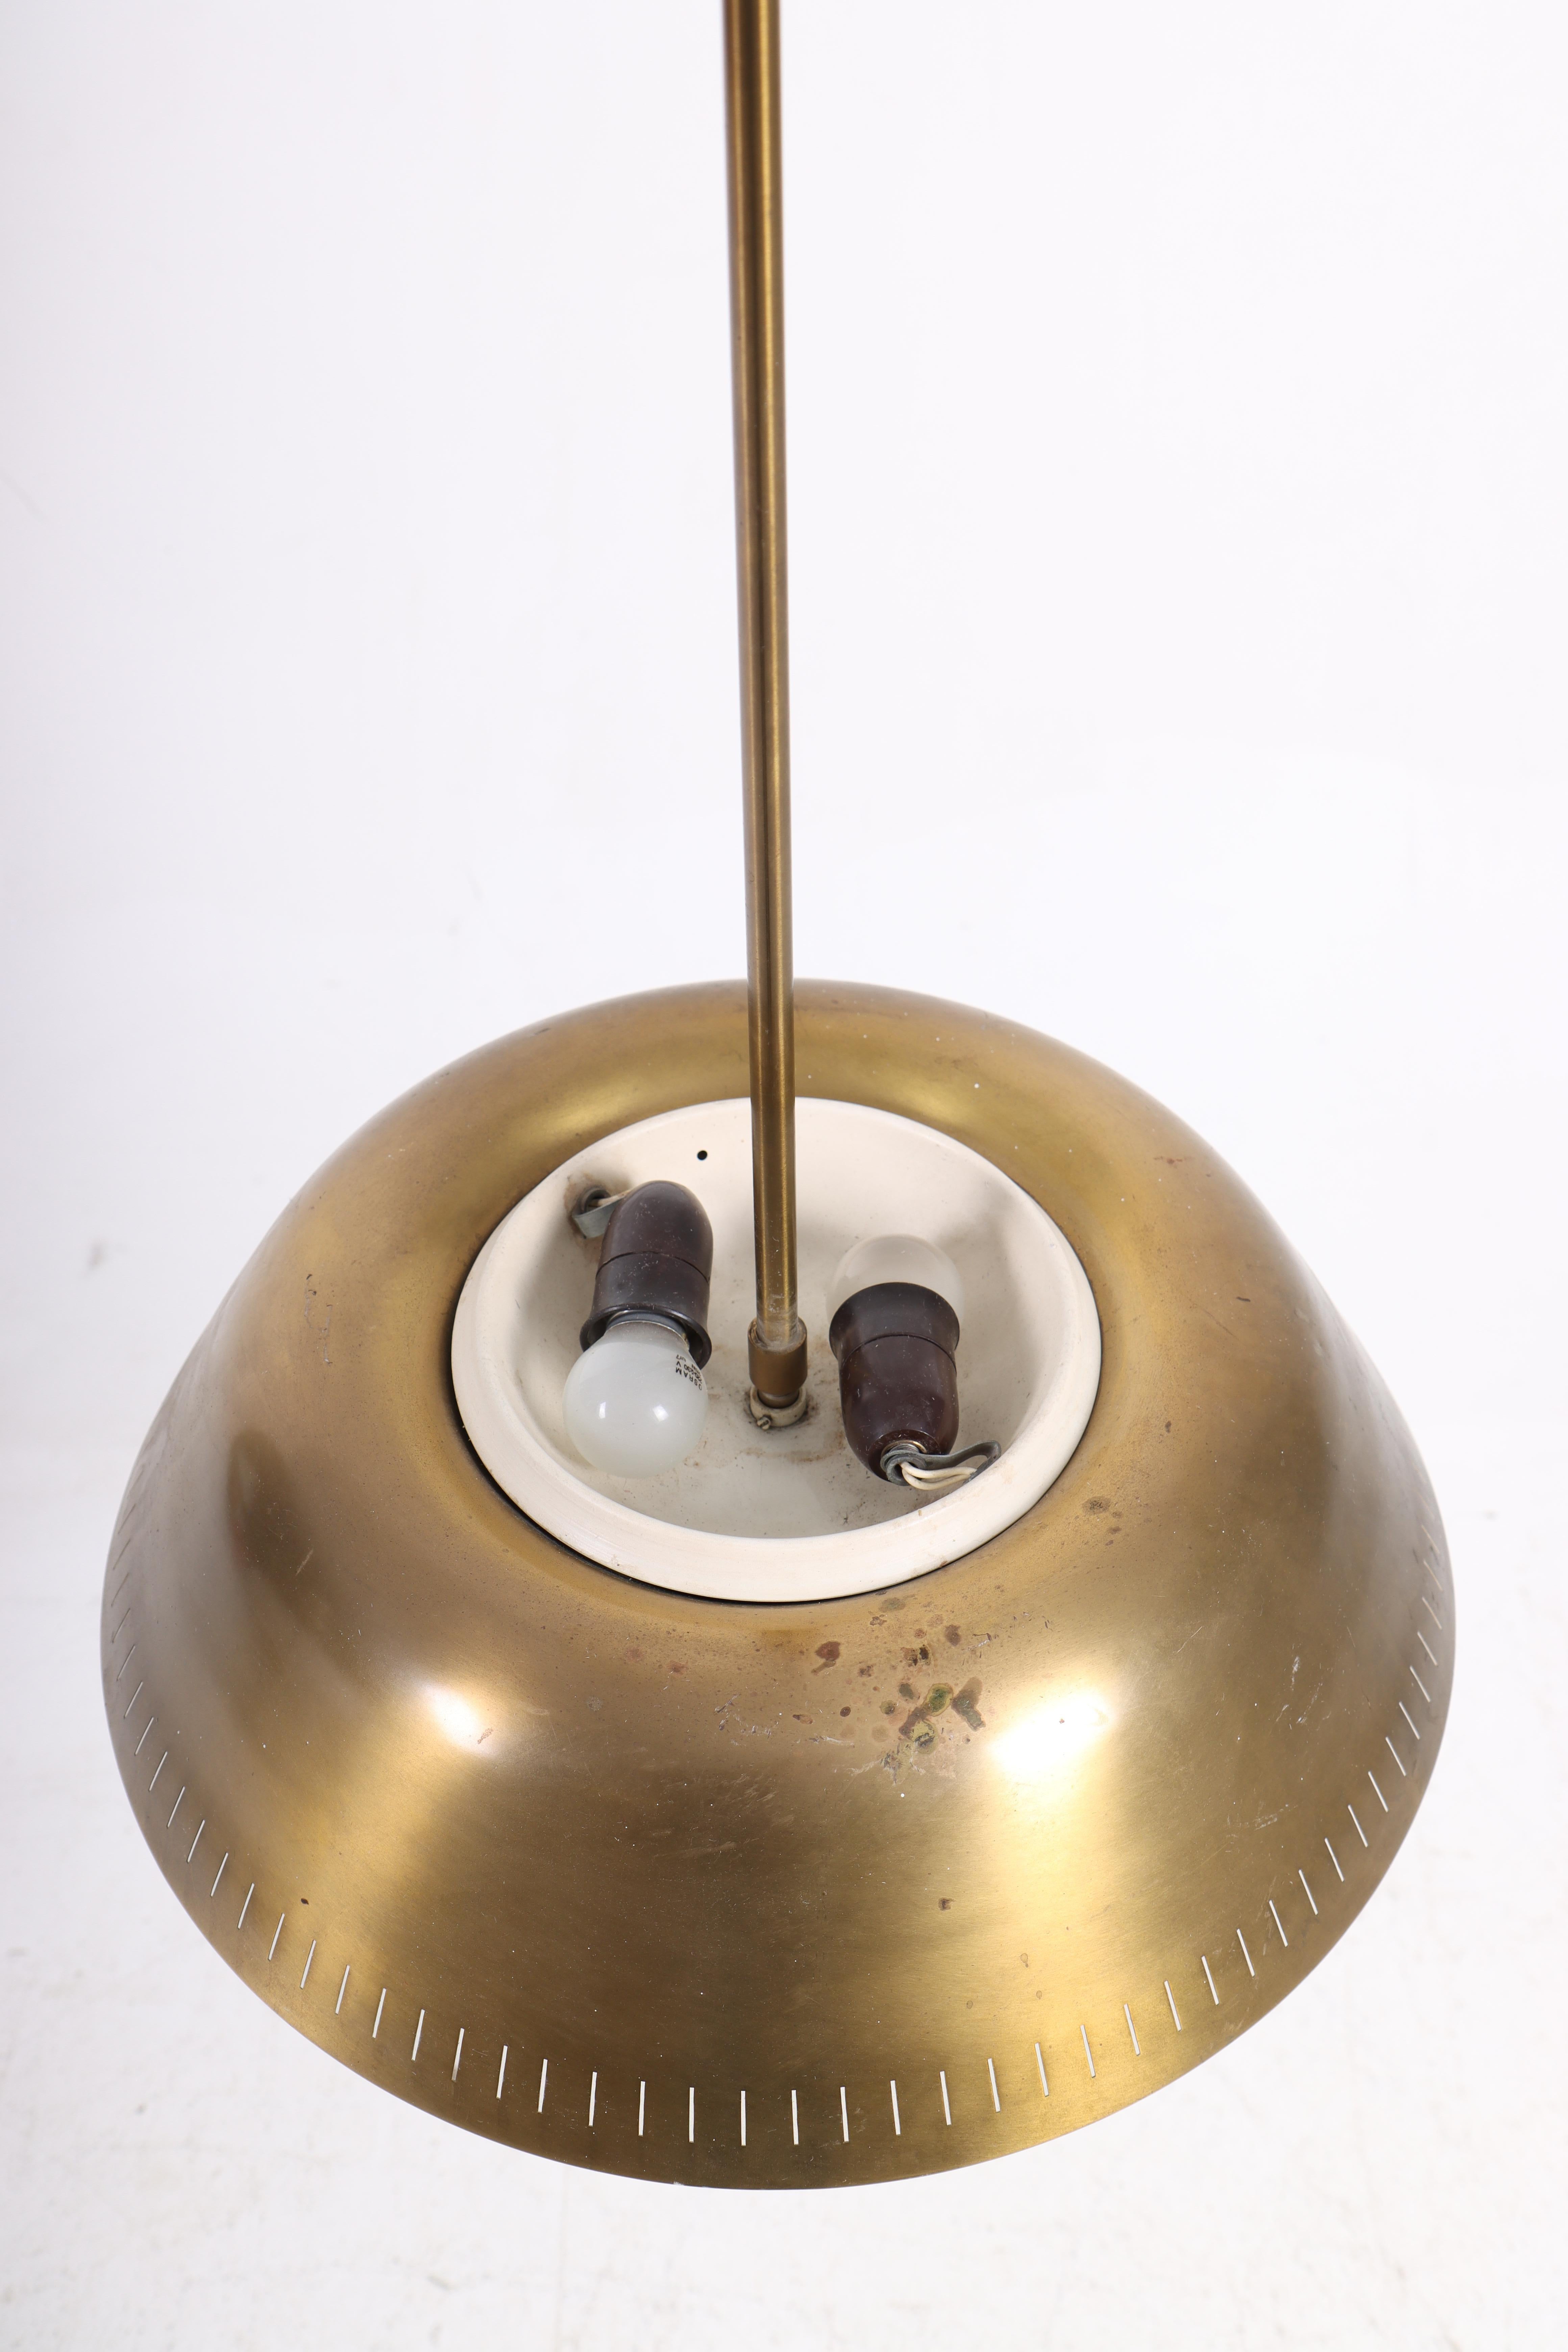 Scandinavian Modern Midcentury Ceiling Lamp in Brass by Harald Notini, 1950s For Sale